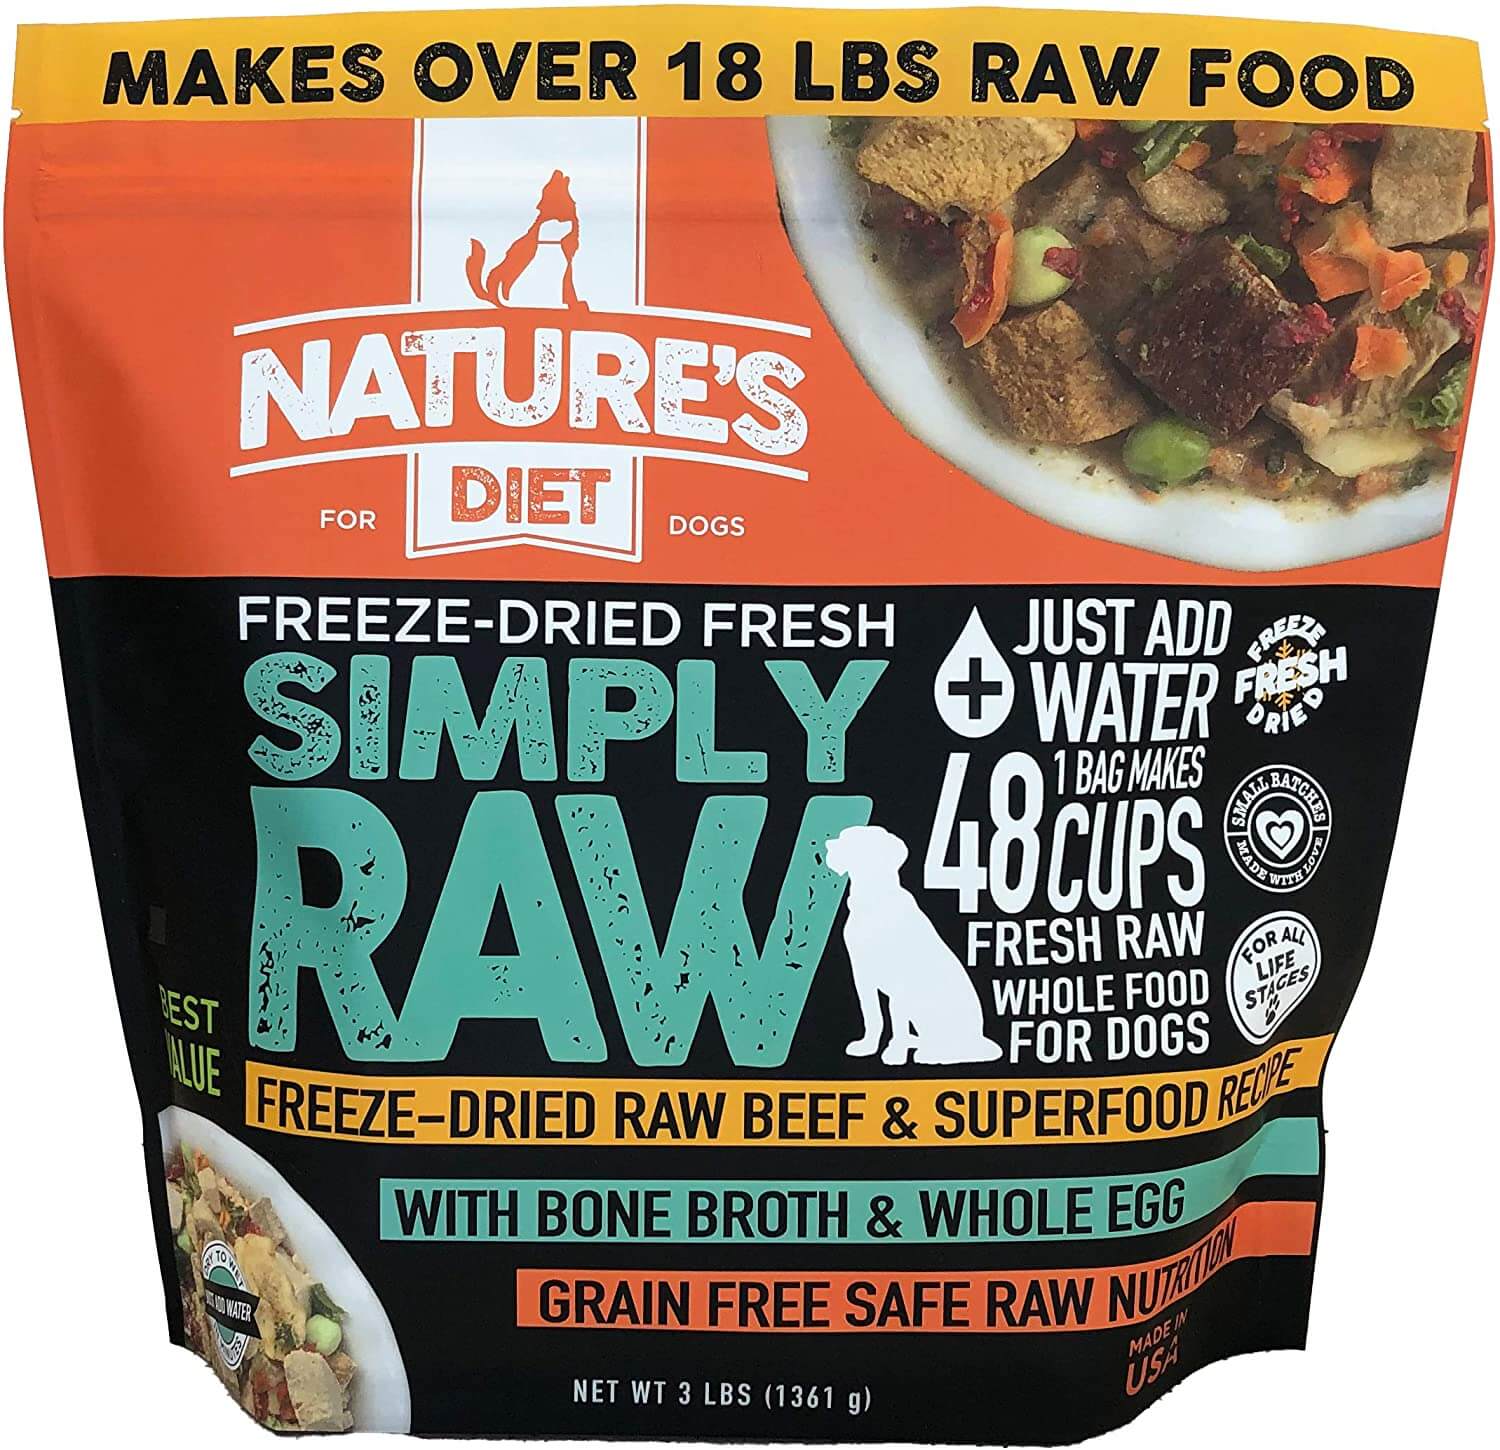 Nature's Diet Simply Raw Freeze-Dried Raw Whole Food Meal